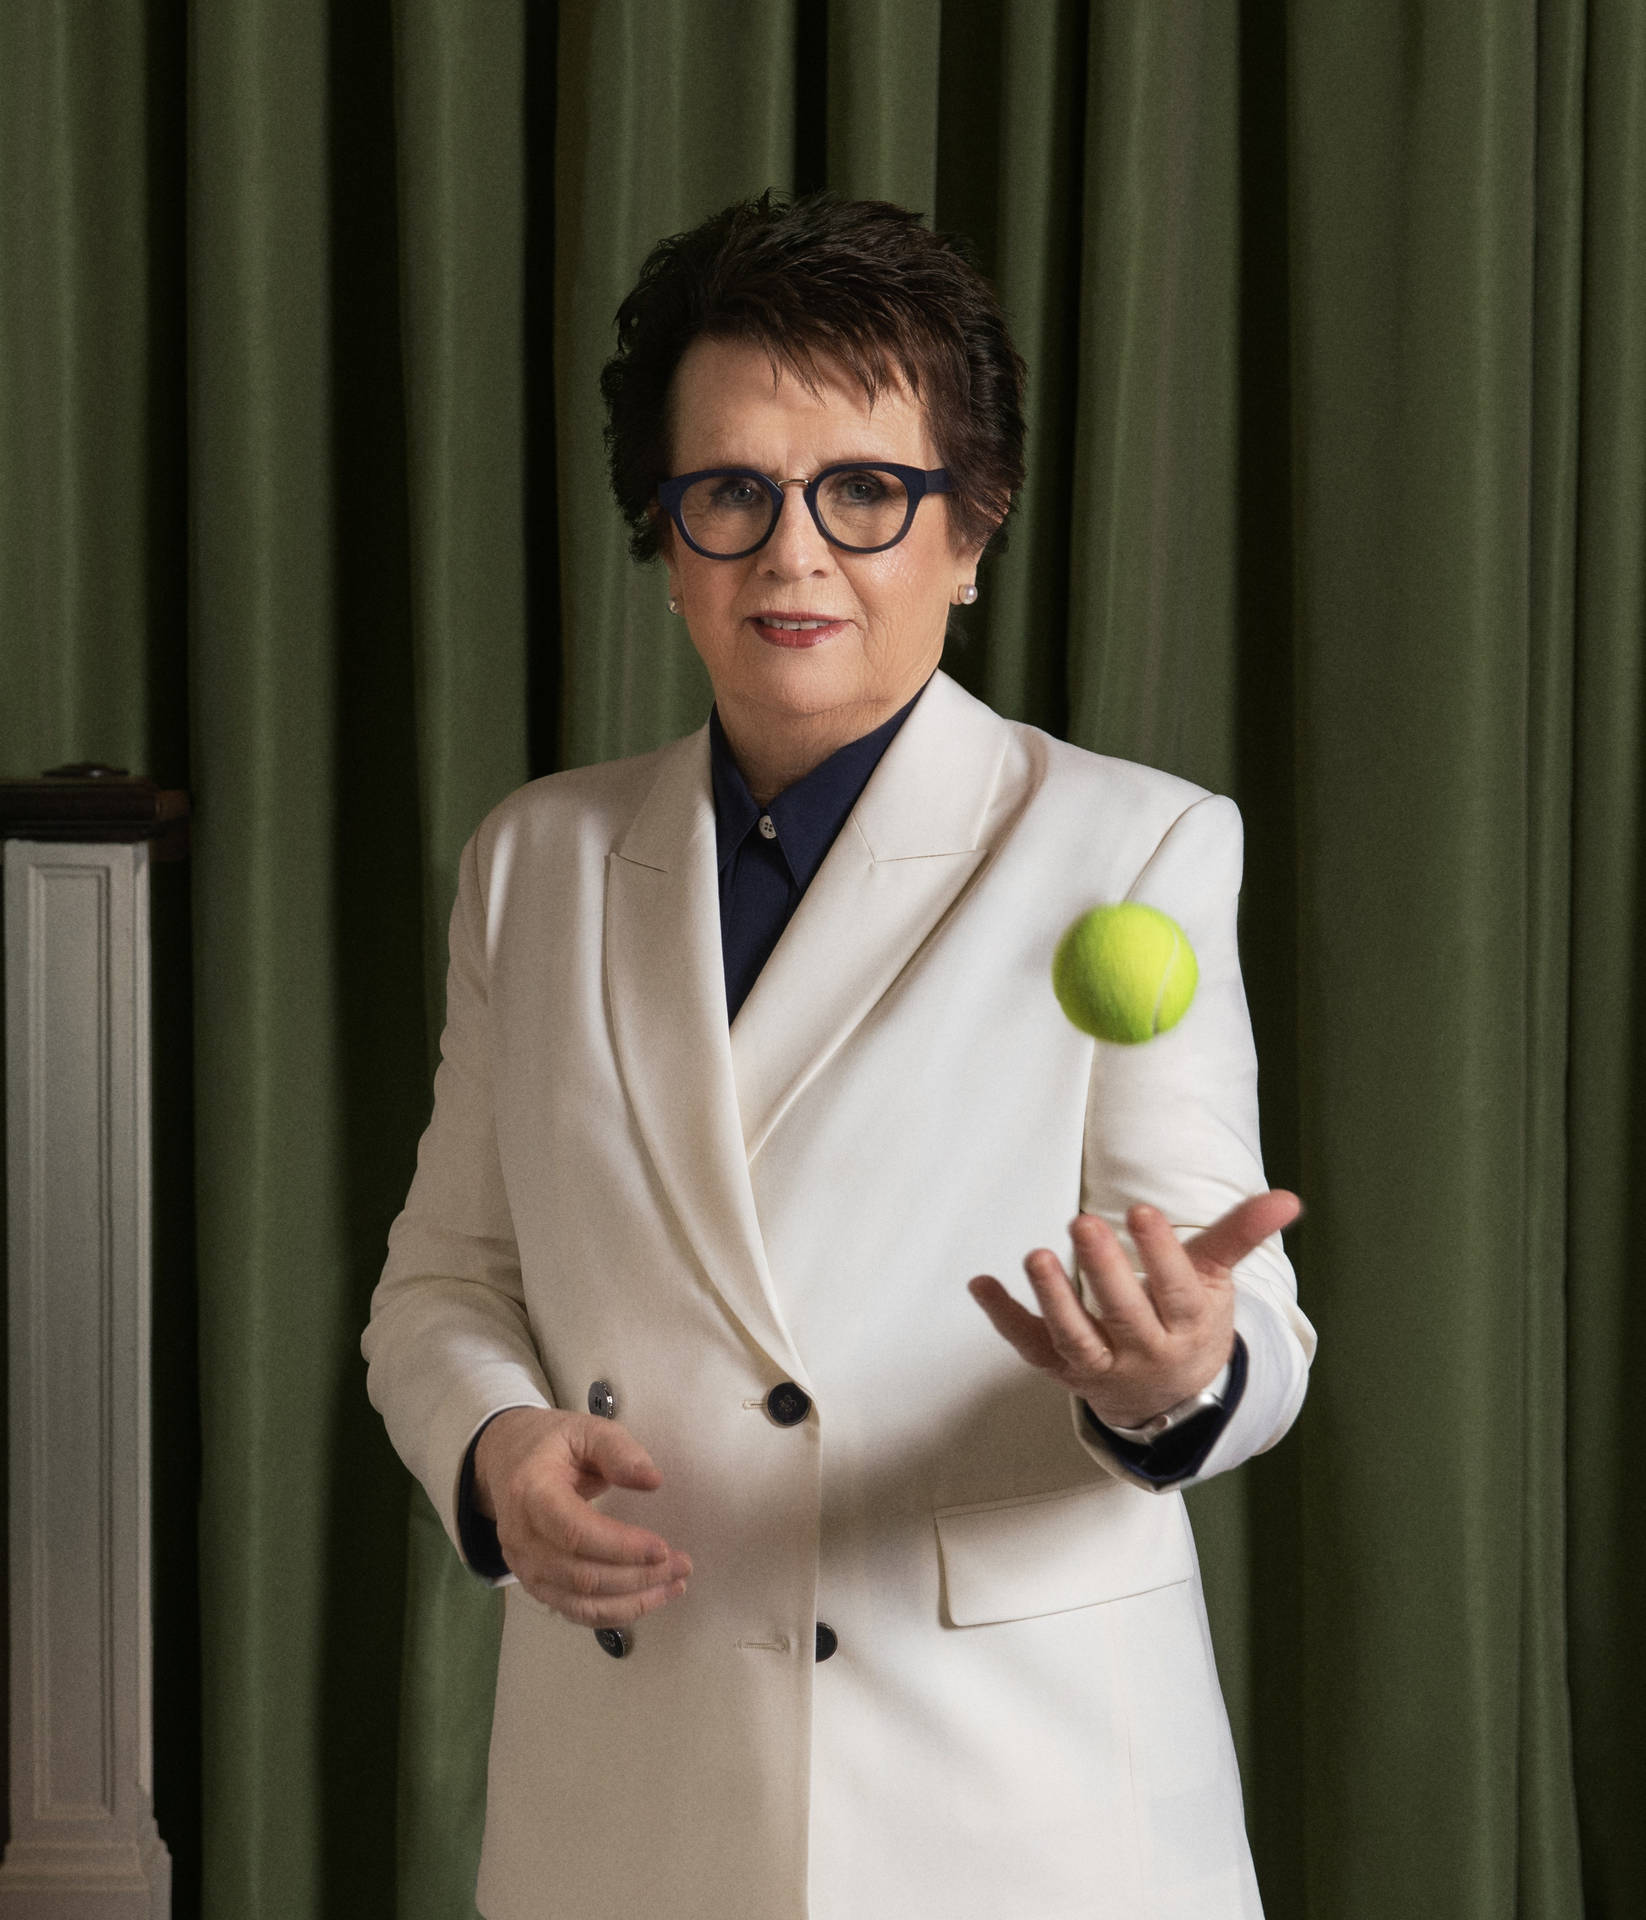 Billie Jean King in action at the tennis court Wallpaper